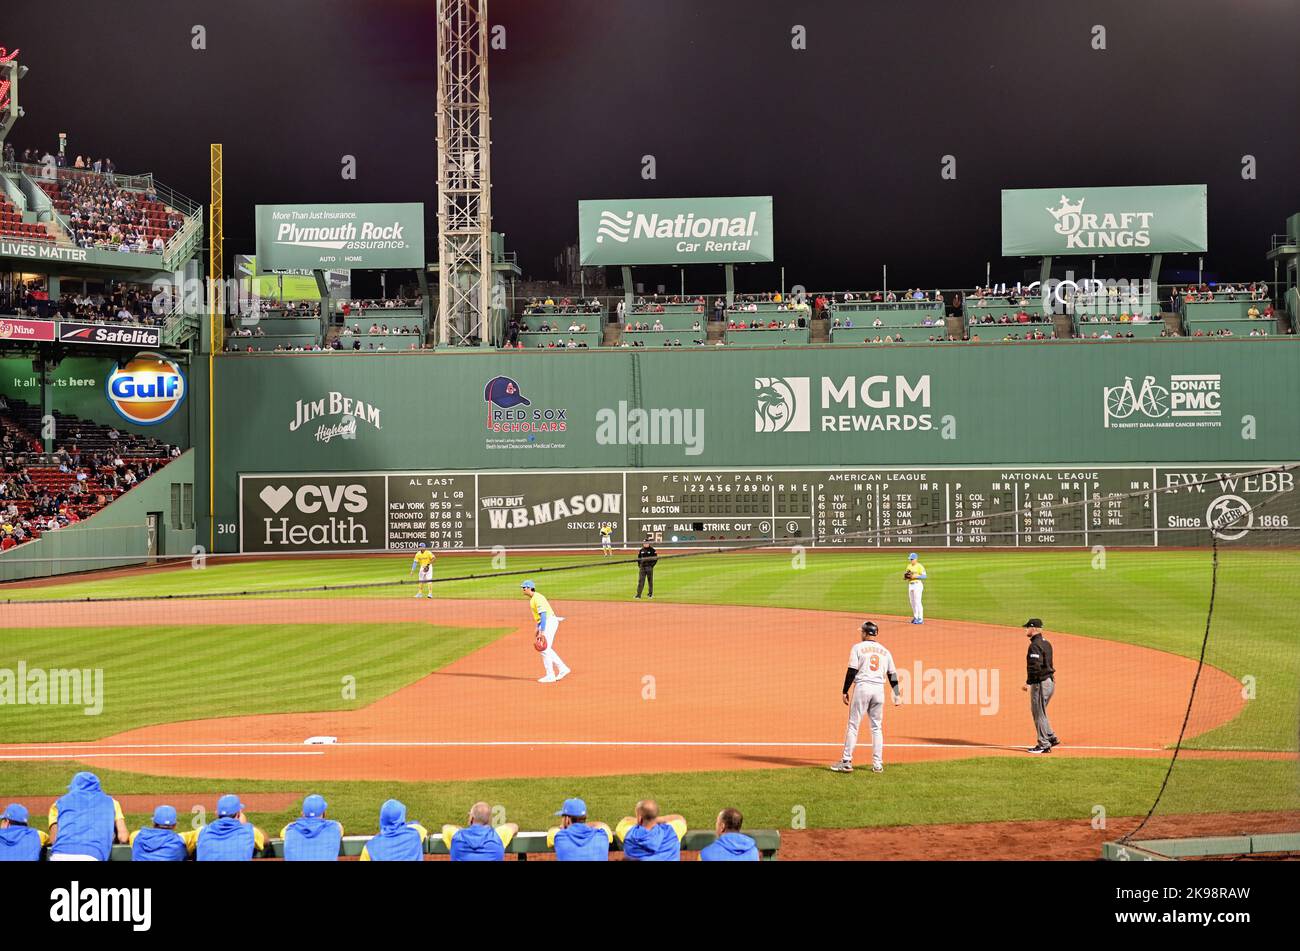 Boston, Massachusetts, USA. Game night at Fenway Park in Boston. In the distance is the ballpark's famed left field wall known as the 'Green Monster.' Stock Photo